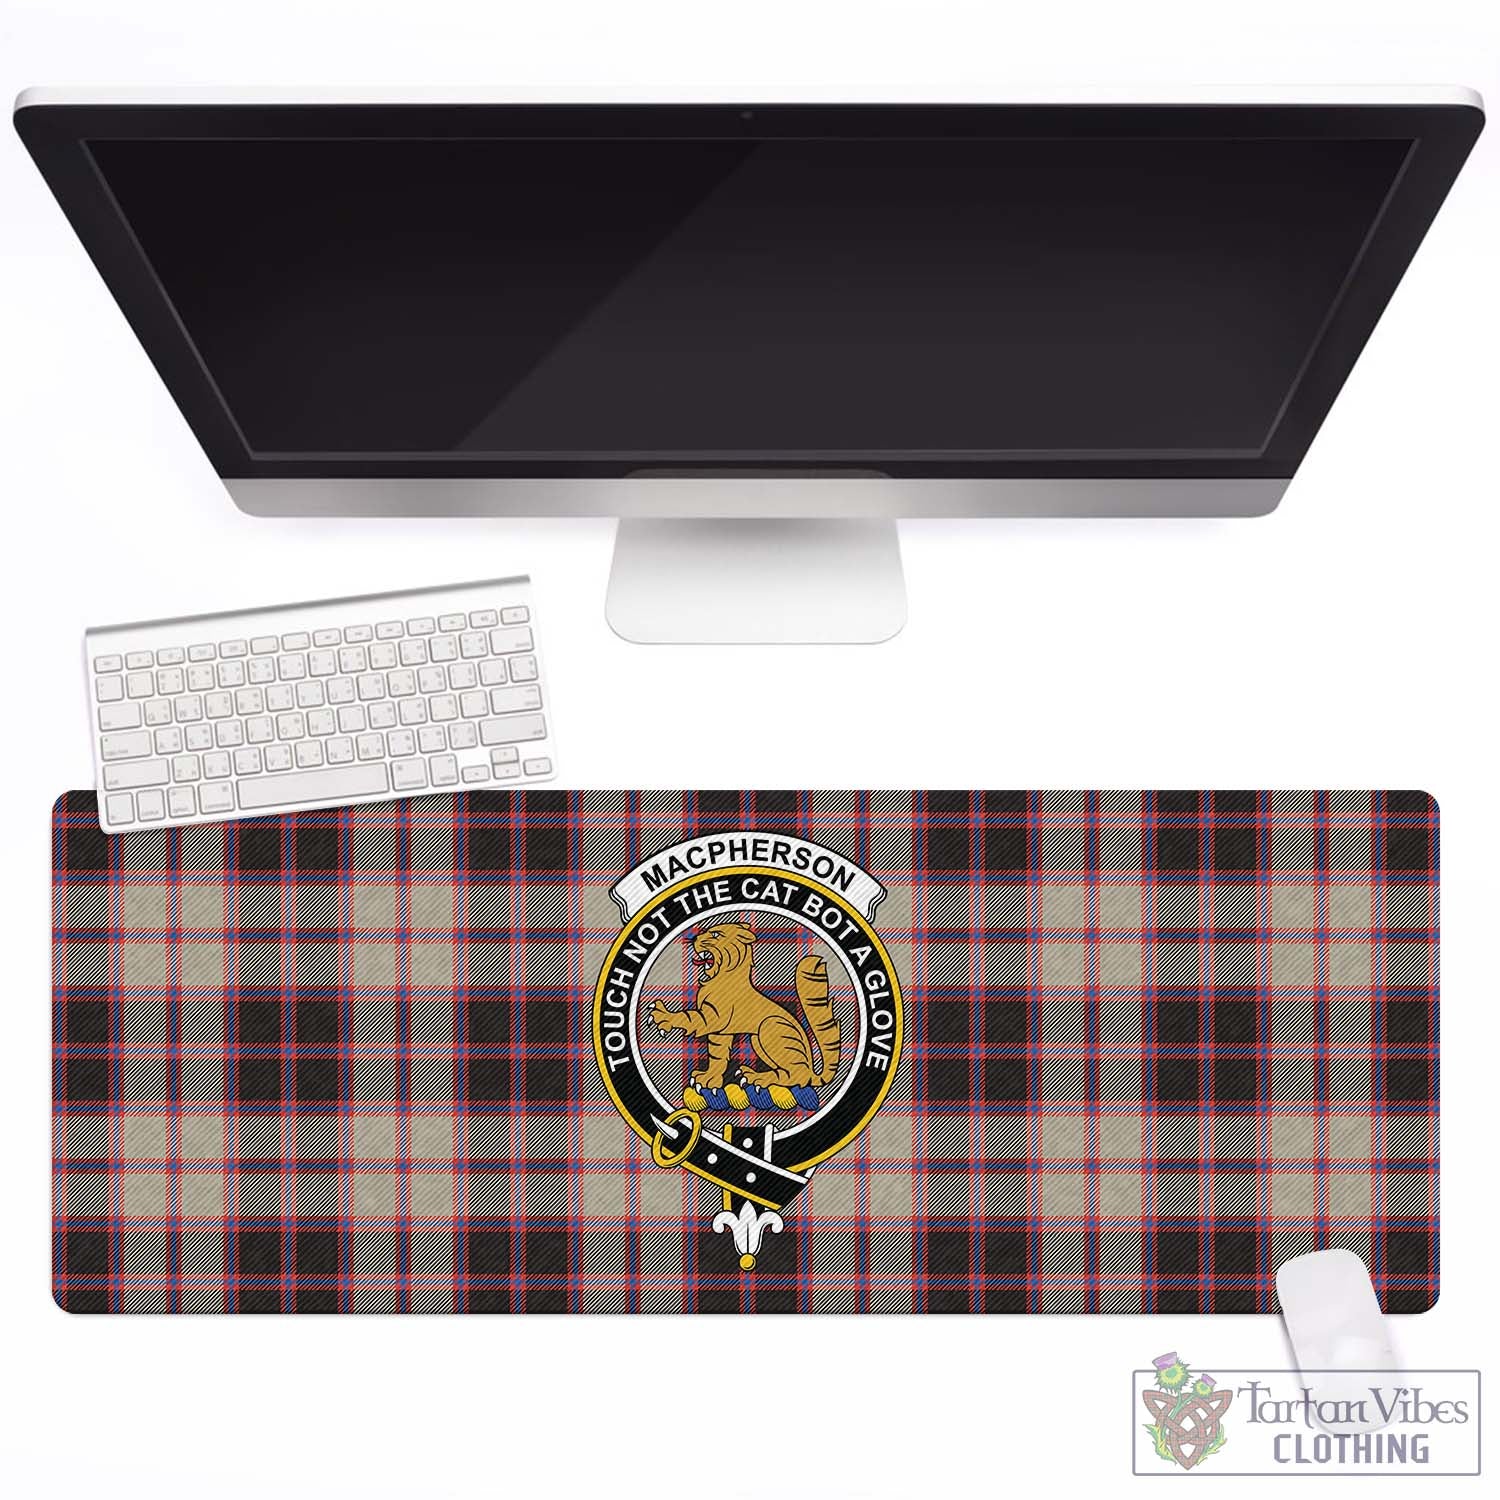 Tartan Vibes Clothing MacPherson Hunting Ancient Tartan Mouse Pad with Family Crest